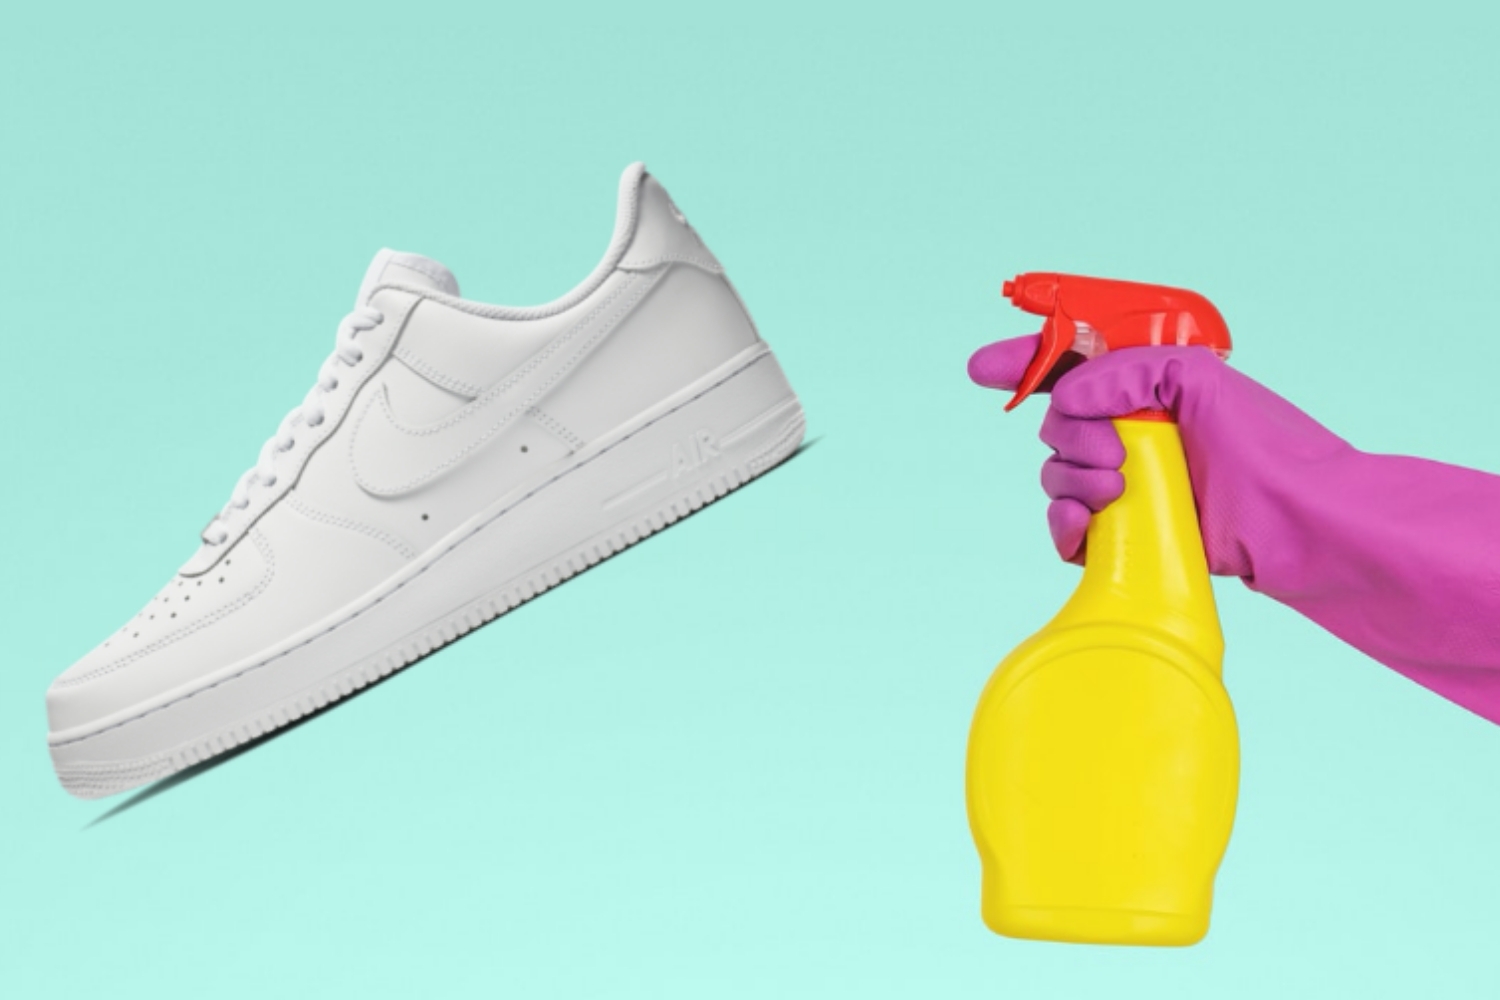 How do you clean White Sneakers?